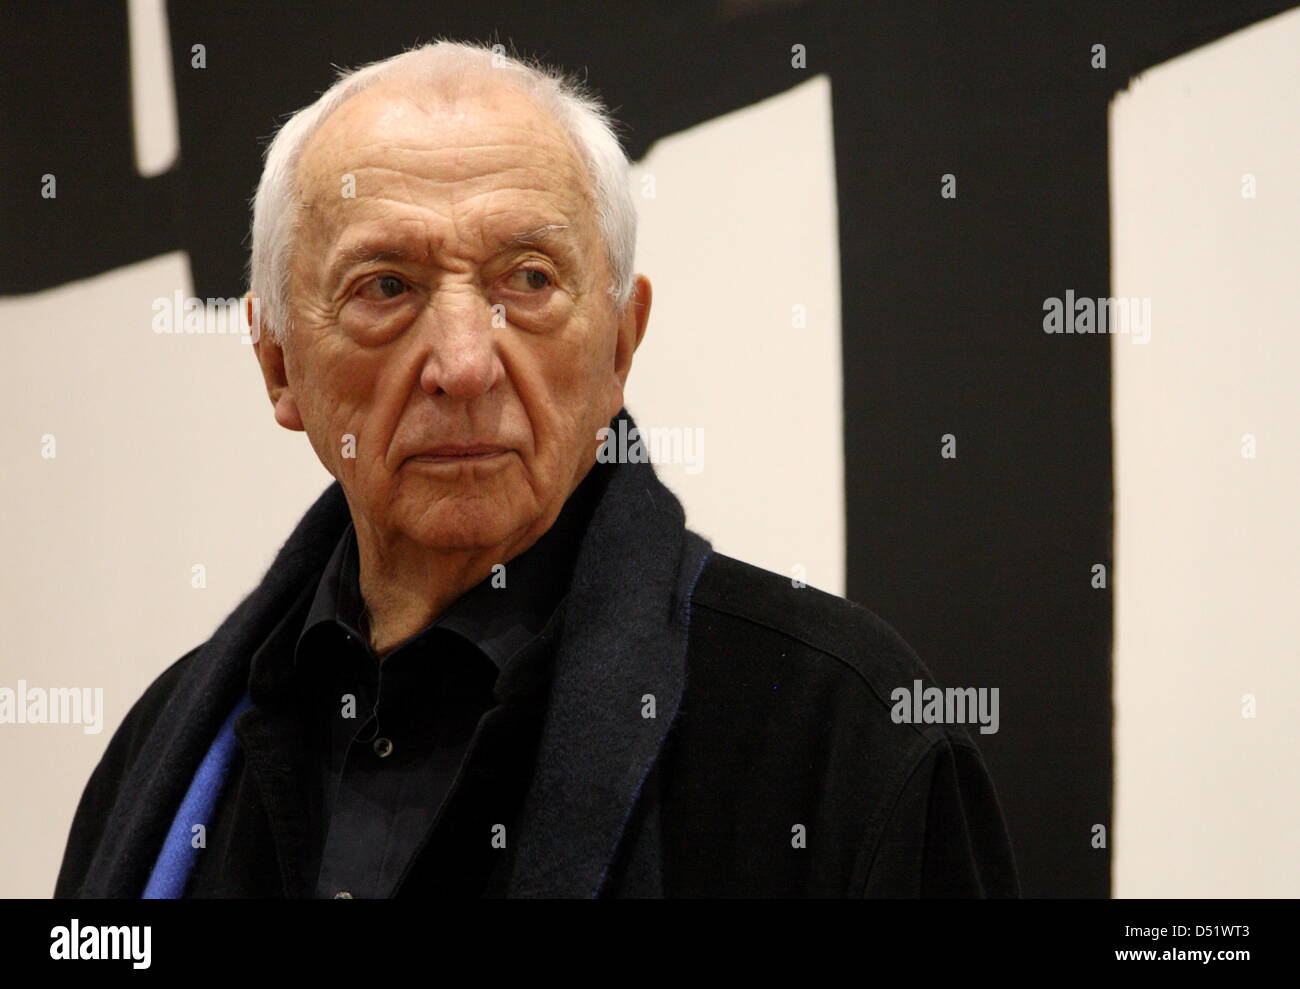 French painter Pierre Soulages leaves a press conference at Martin Gropius Building in Berlin, Germany, 01 October 2010. The works of Soulages are on display at Martin Gropius Building until 17 January 2011. Photo: CHRISTINE CORNELIUS Stock Photo